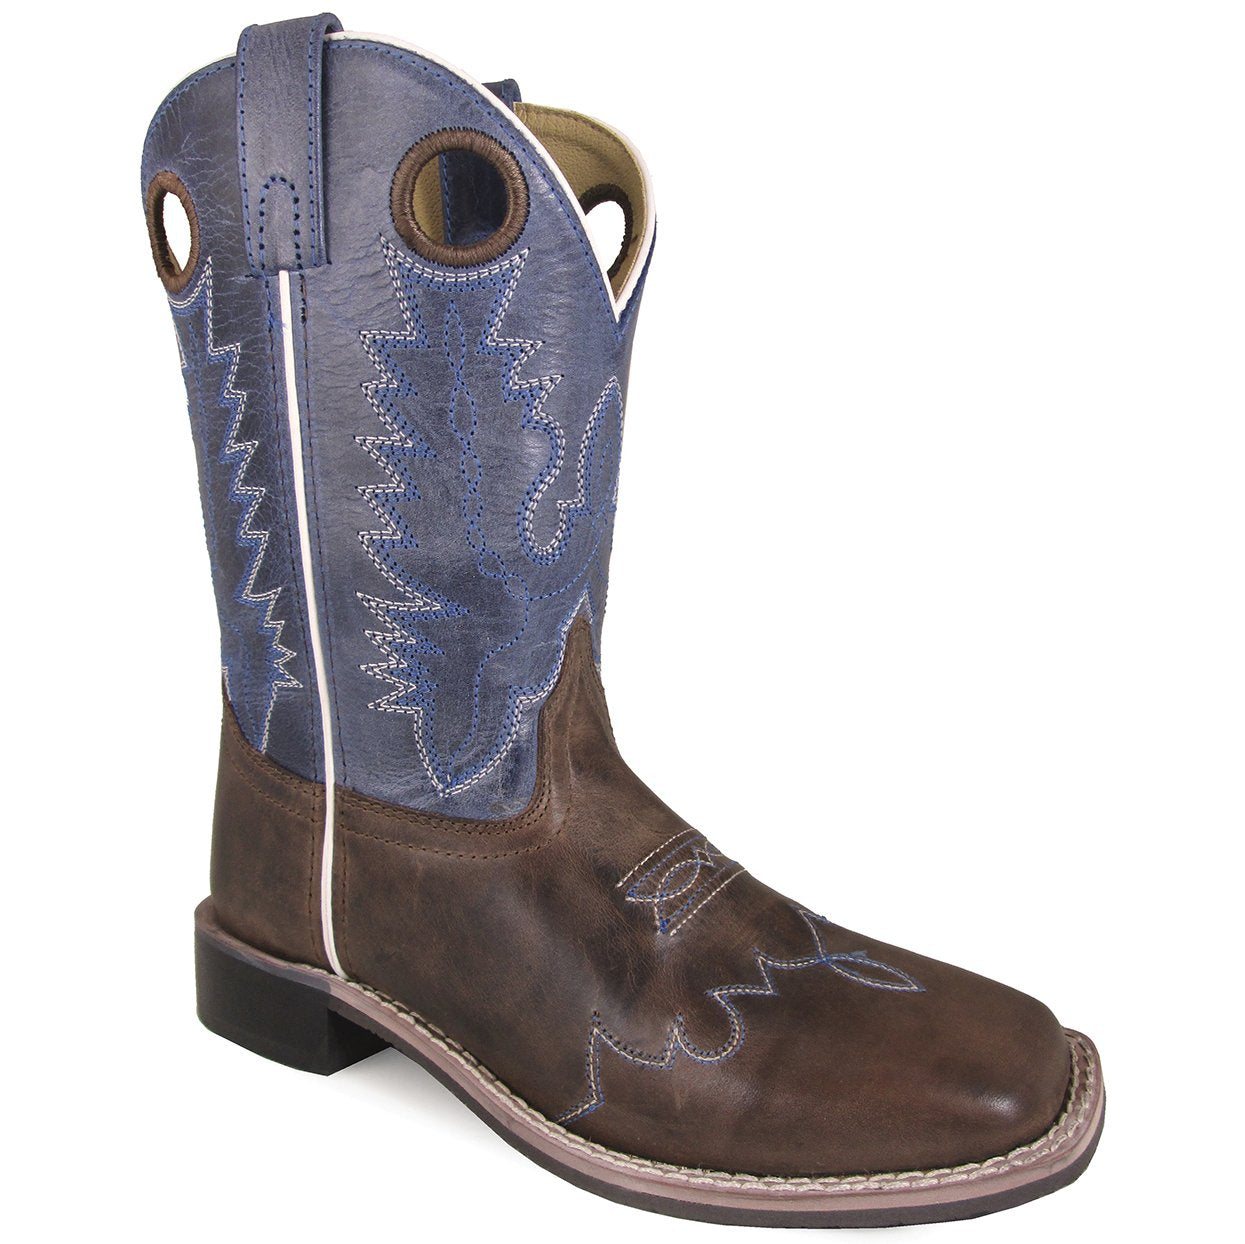 Smoky Mountain Children's Delta Blue Crackle/Brown Waxed Distress Boot